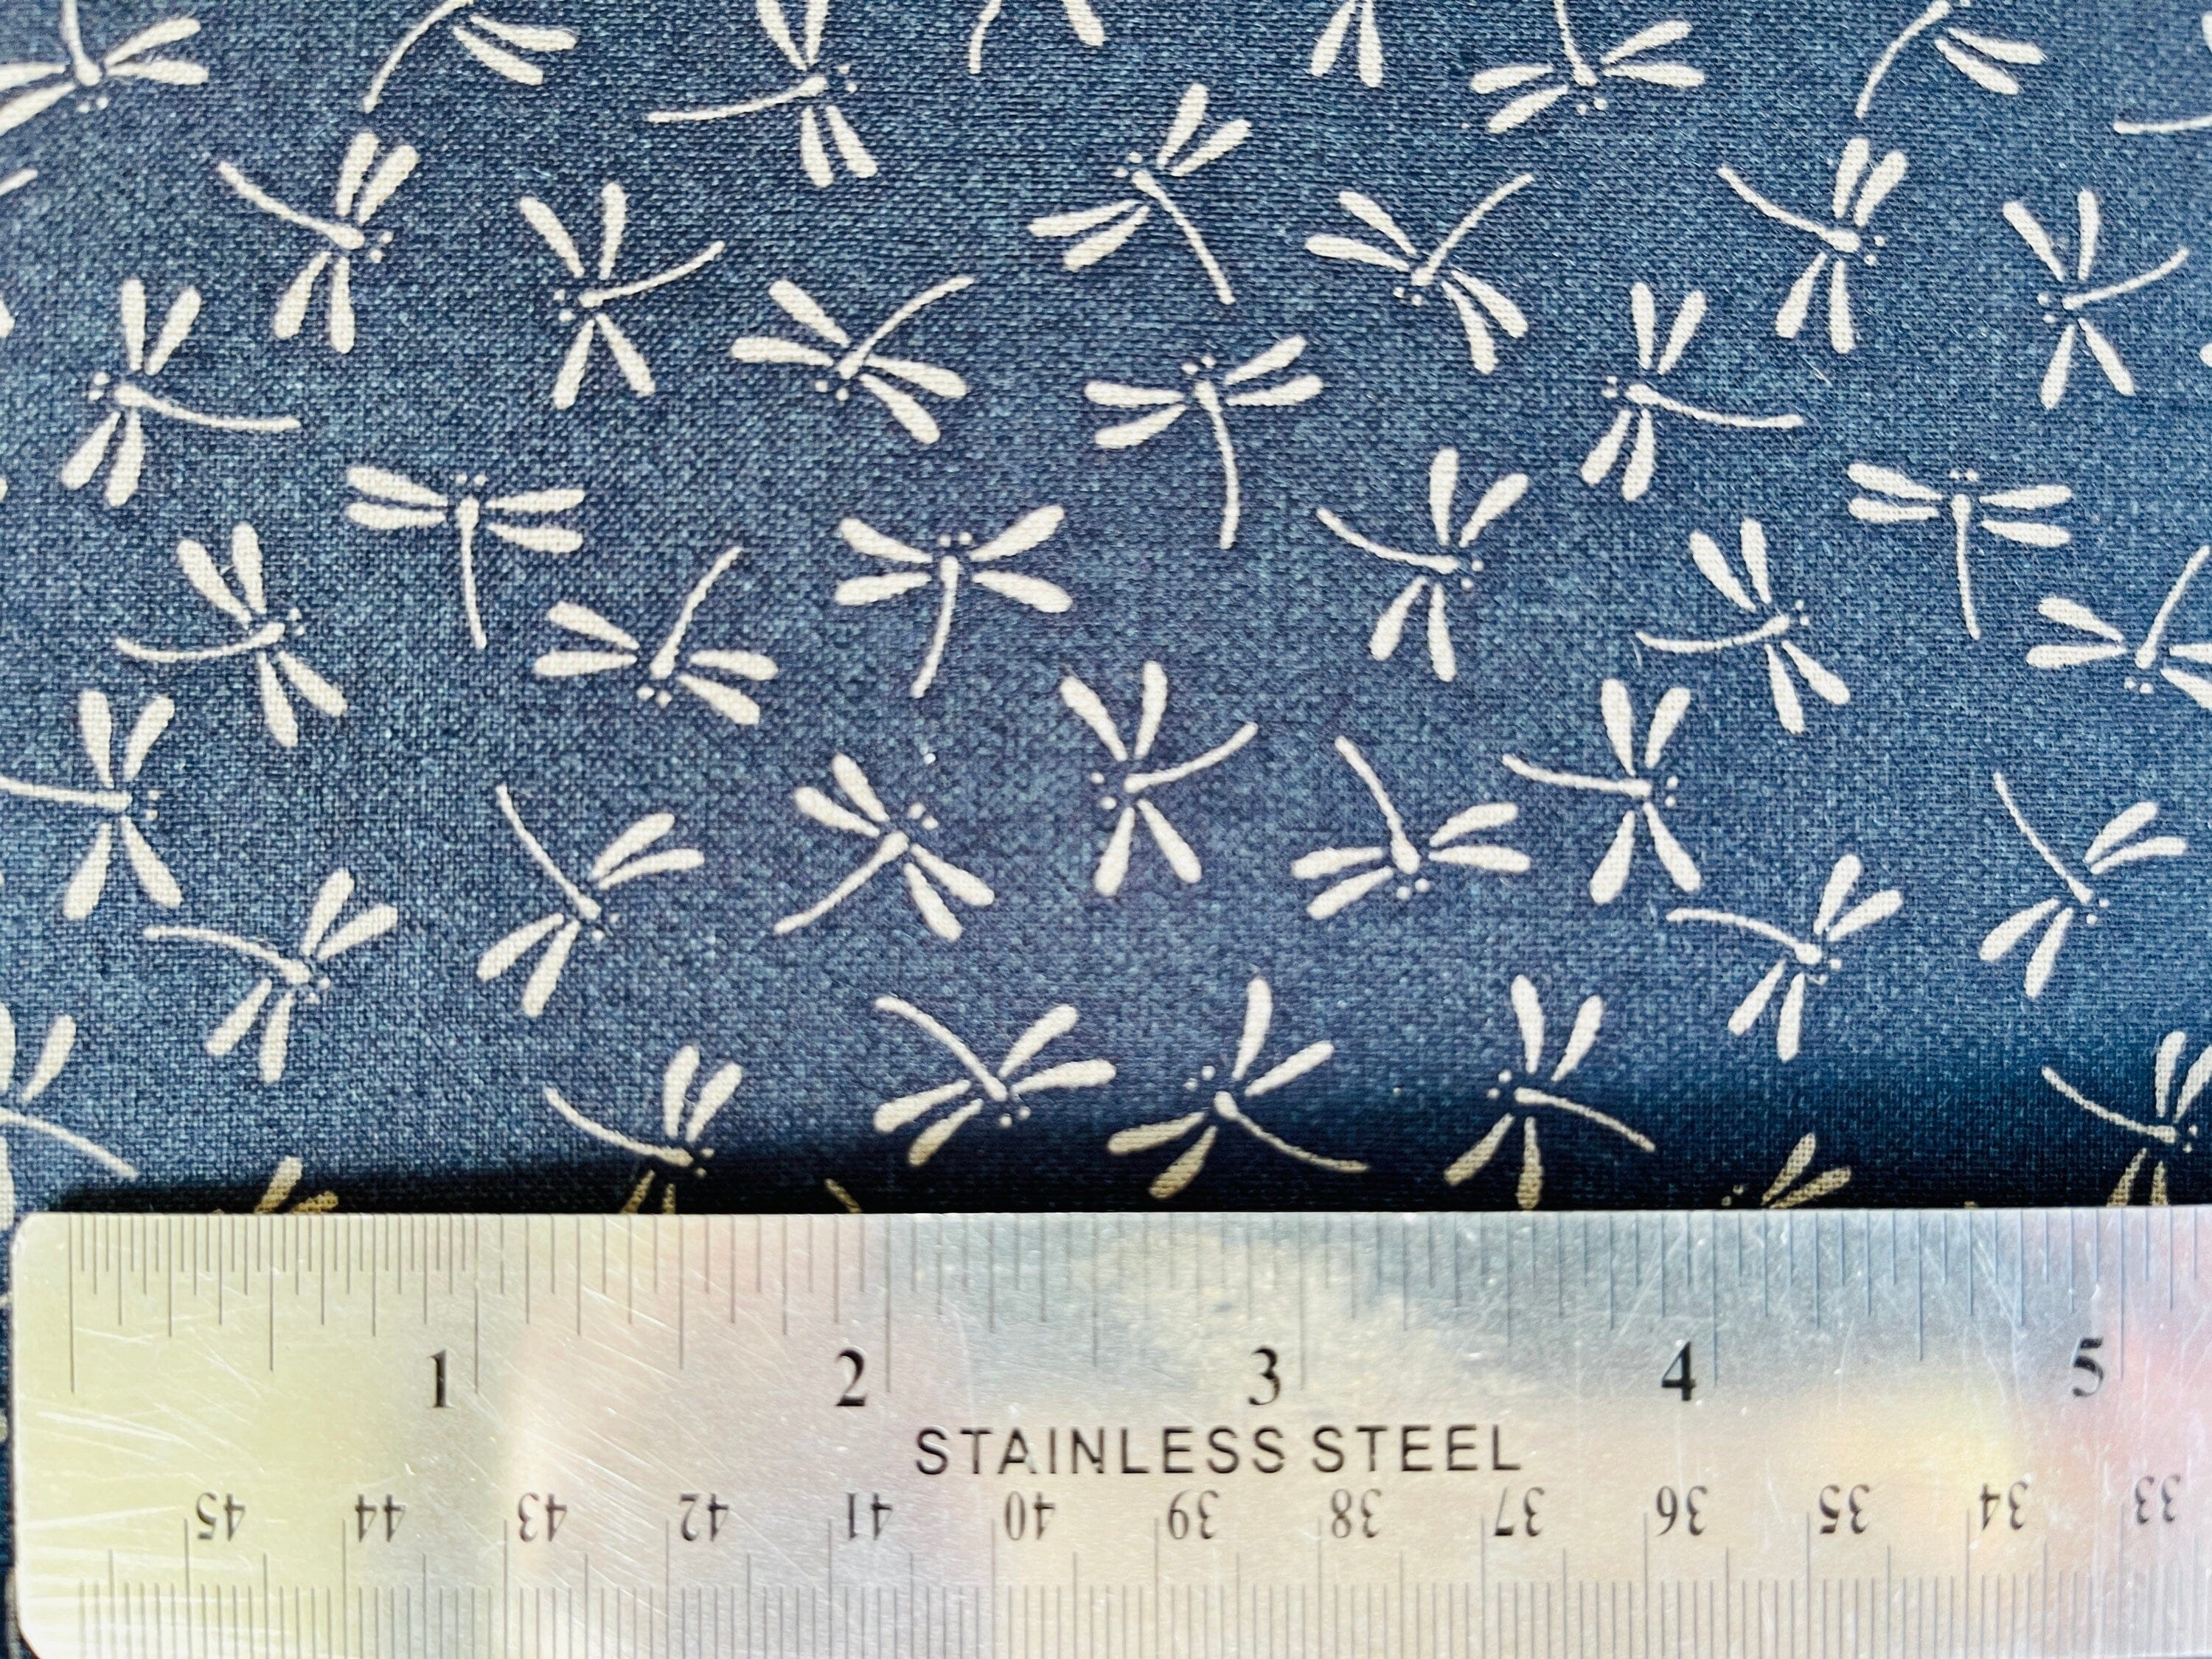 Dragonfly - Dragonfly Fabric - Westex - Sevenberry - Japanese Textile - Cotton Printed Sheeting - 88222-7-14